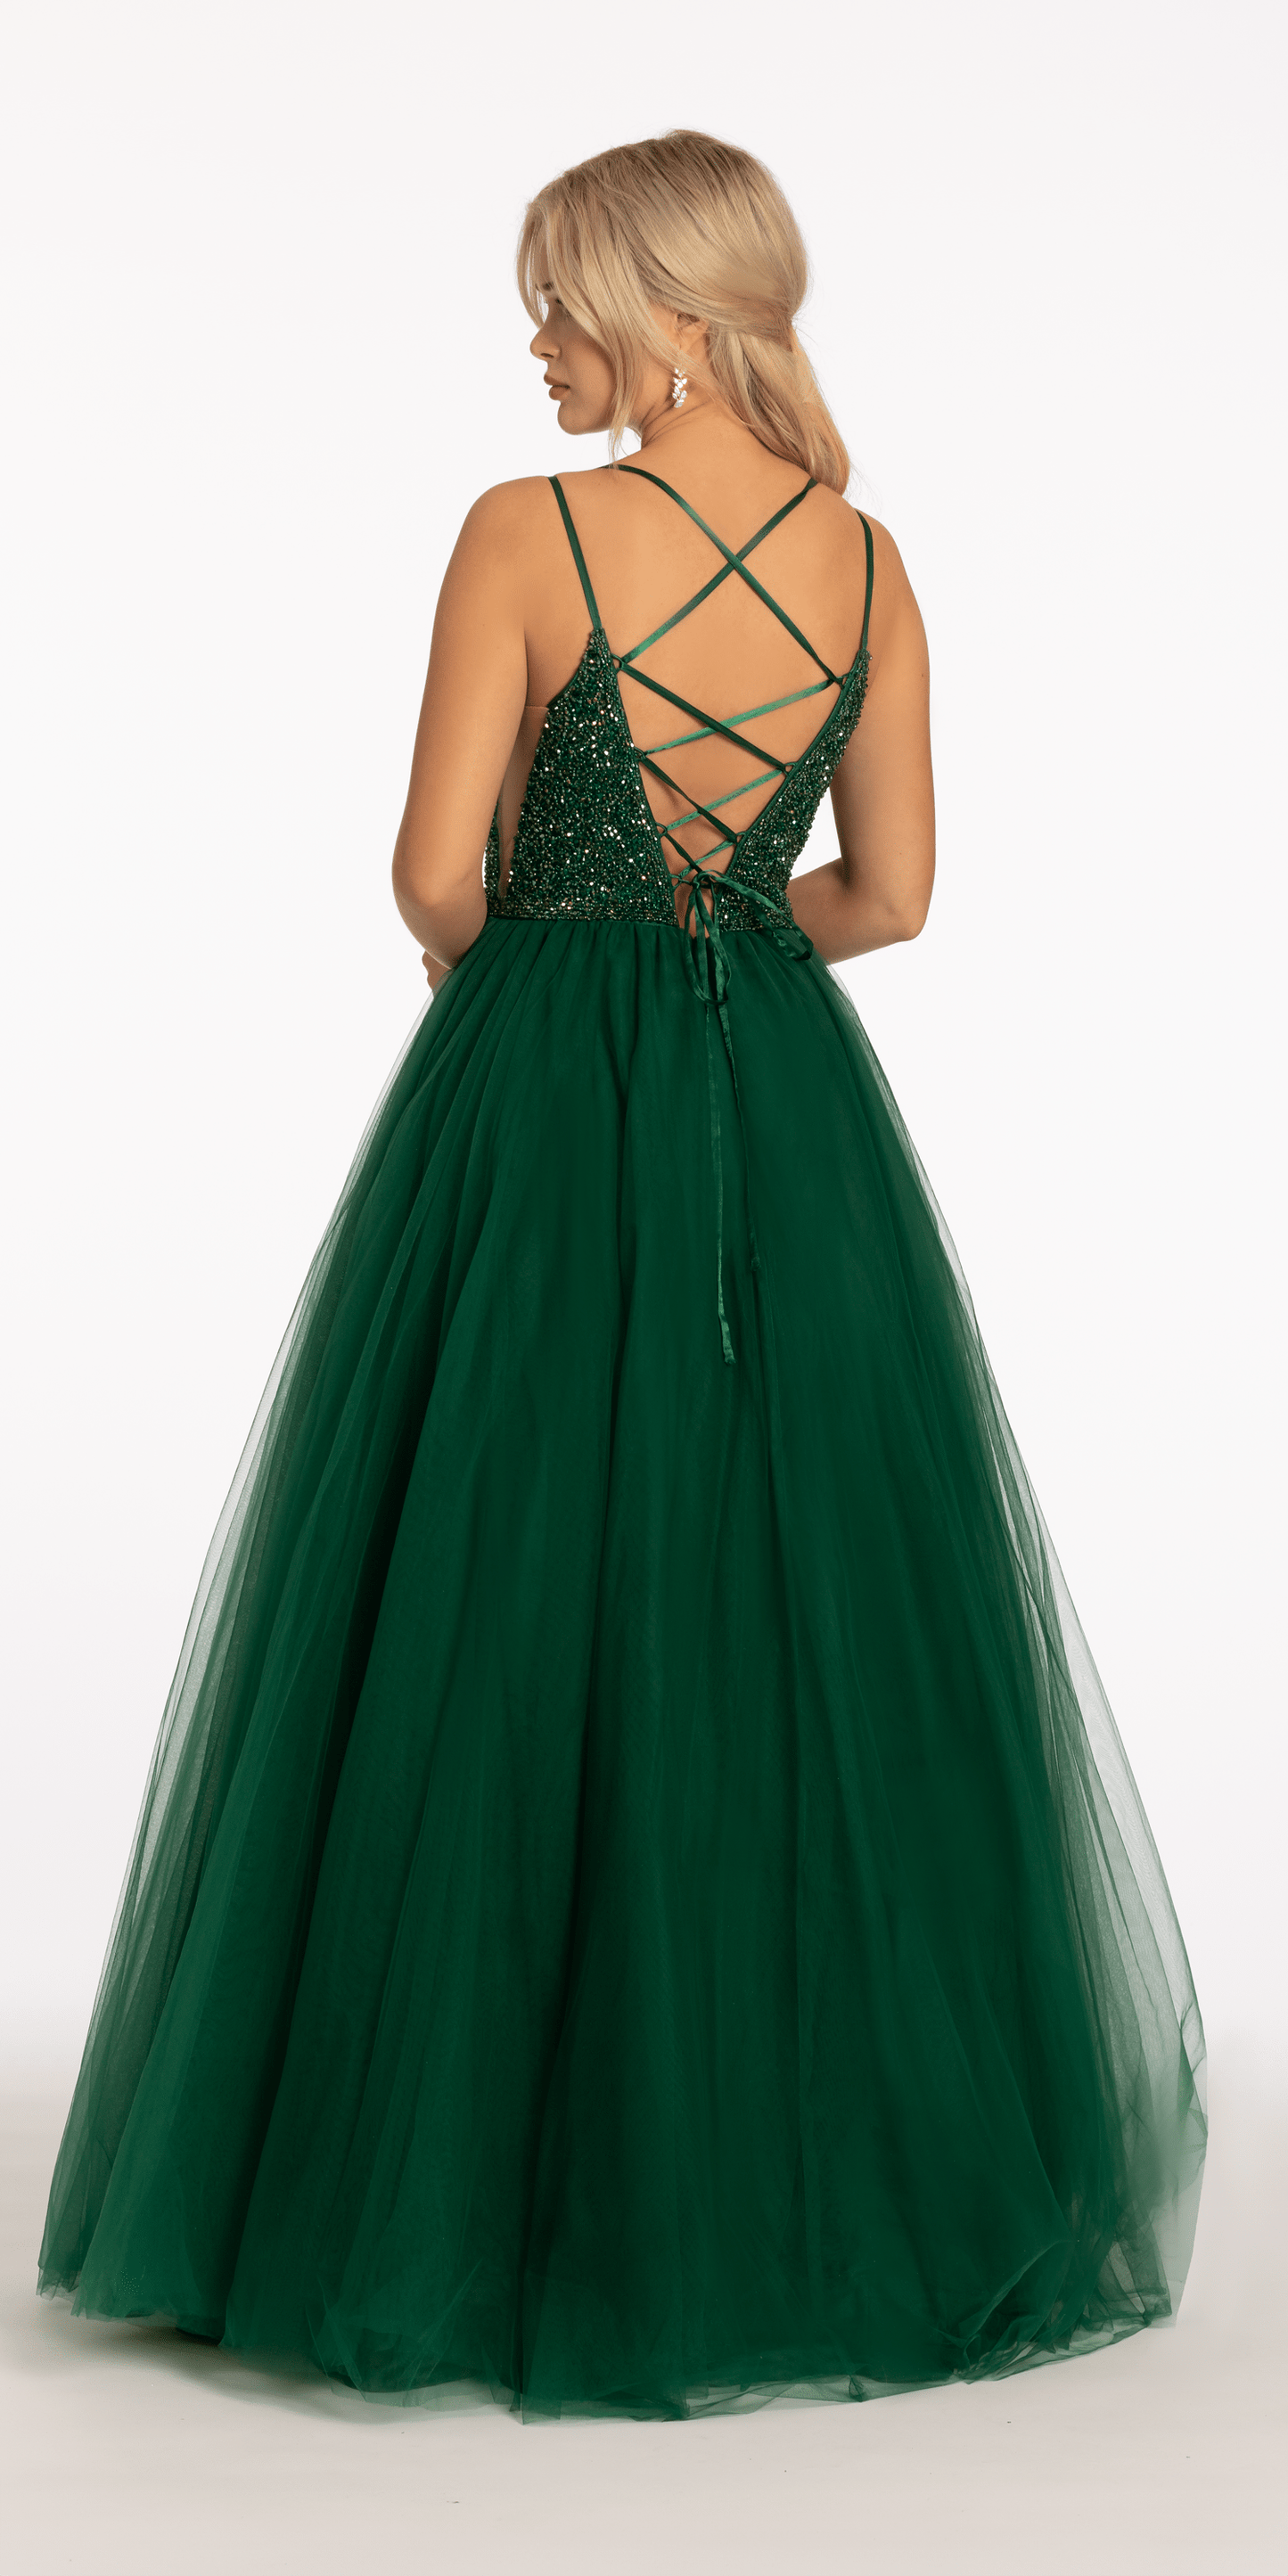 Camille La Vie Beaded Plunging Tulle Lace Up Back Ballgown